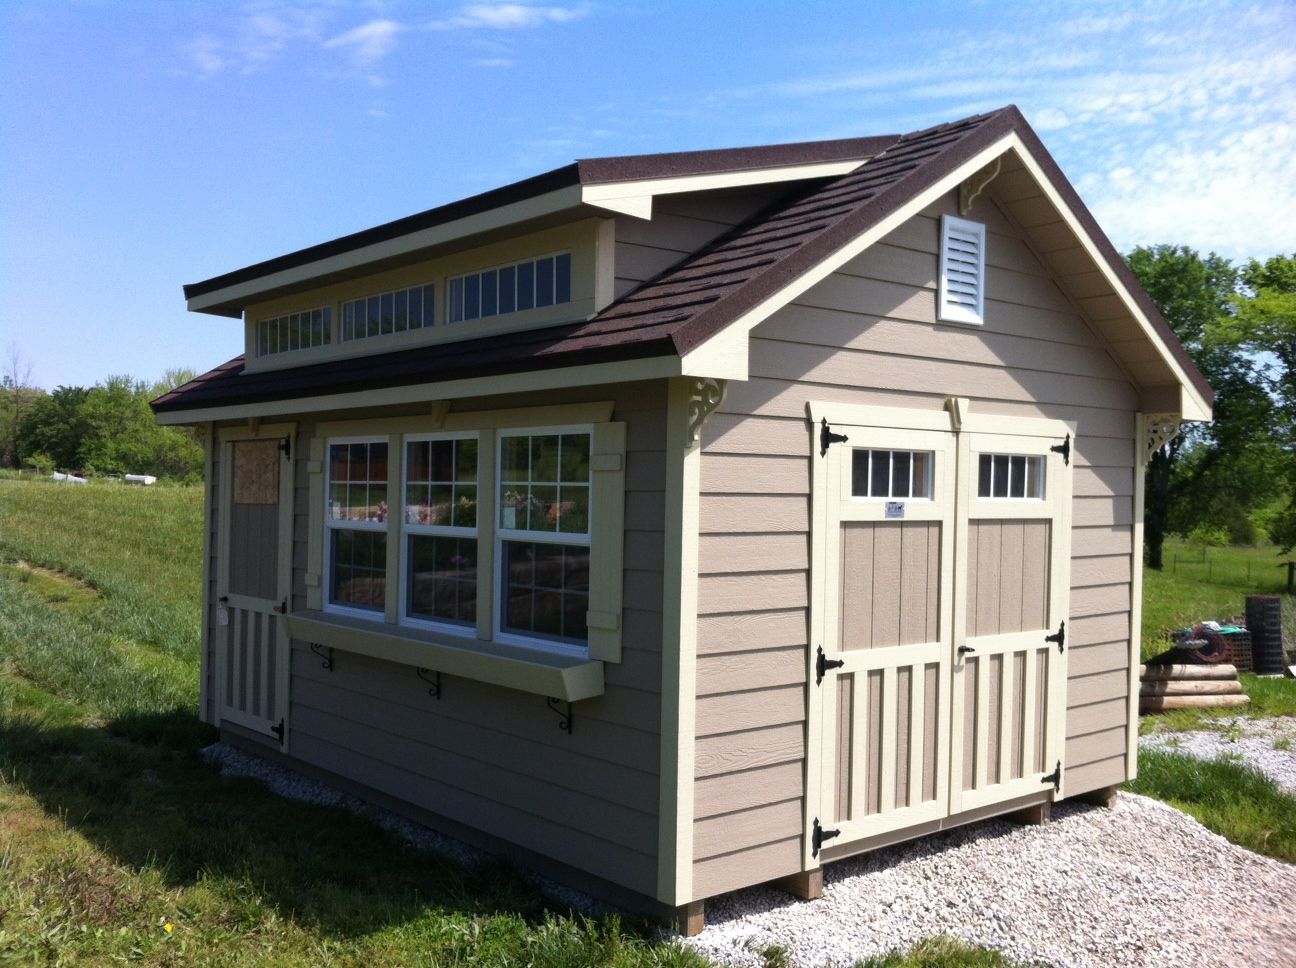 Used Portable Buildings For Sale – Classified Ads